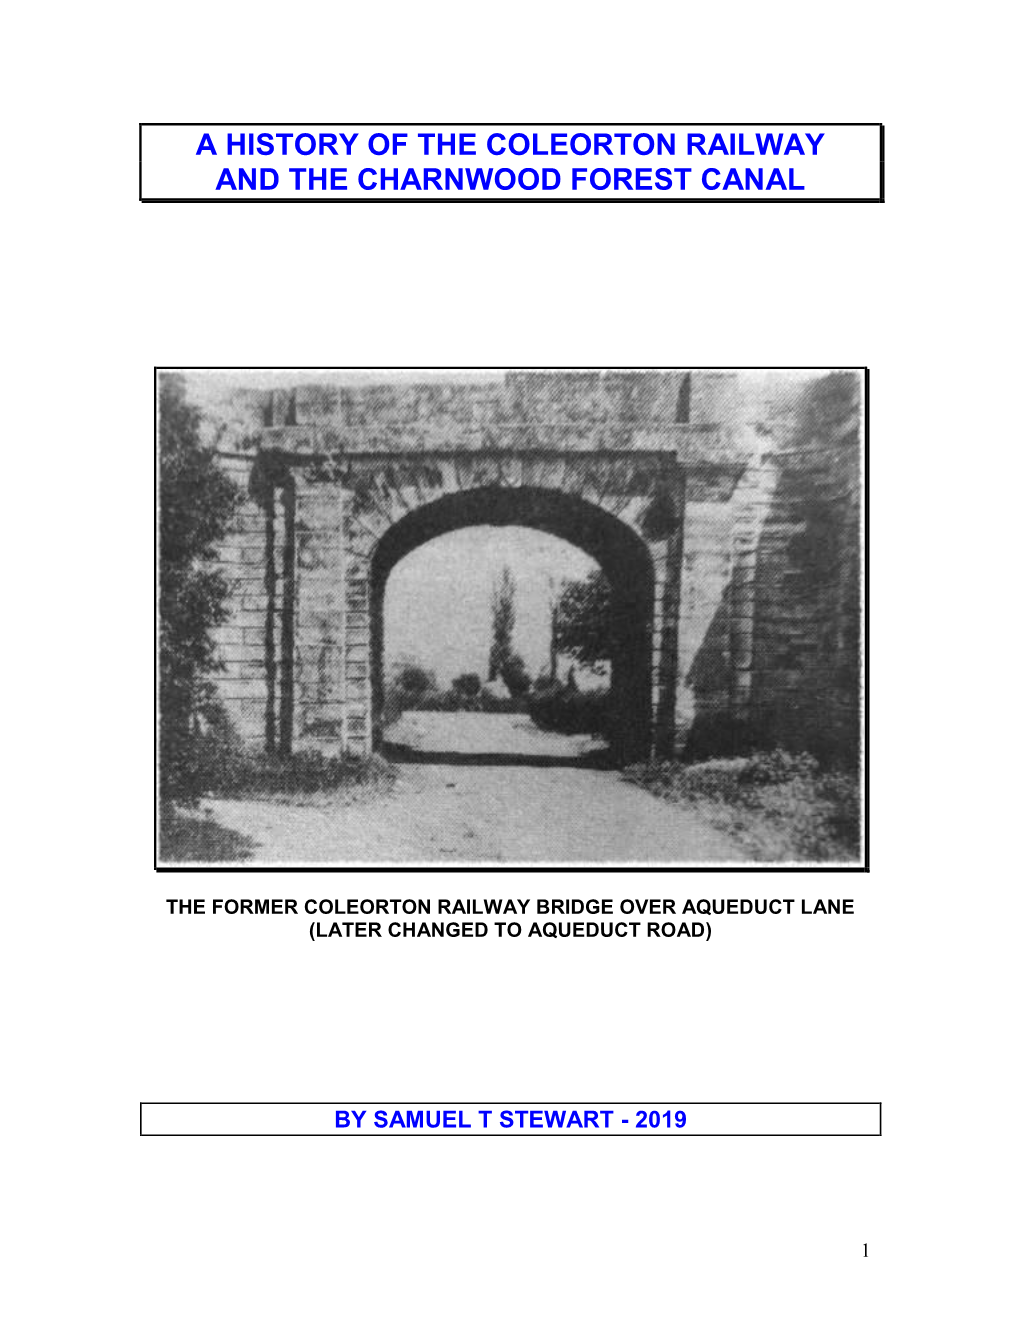 A History of the Coleorton Railway and the Charnwood Forest Canal